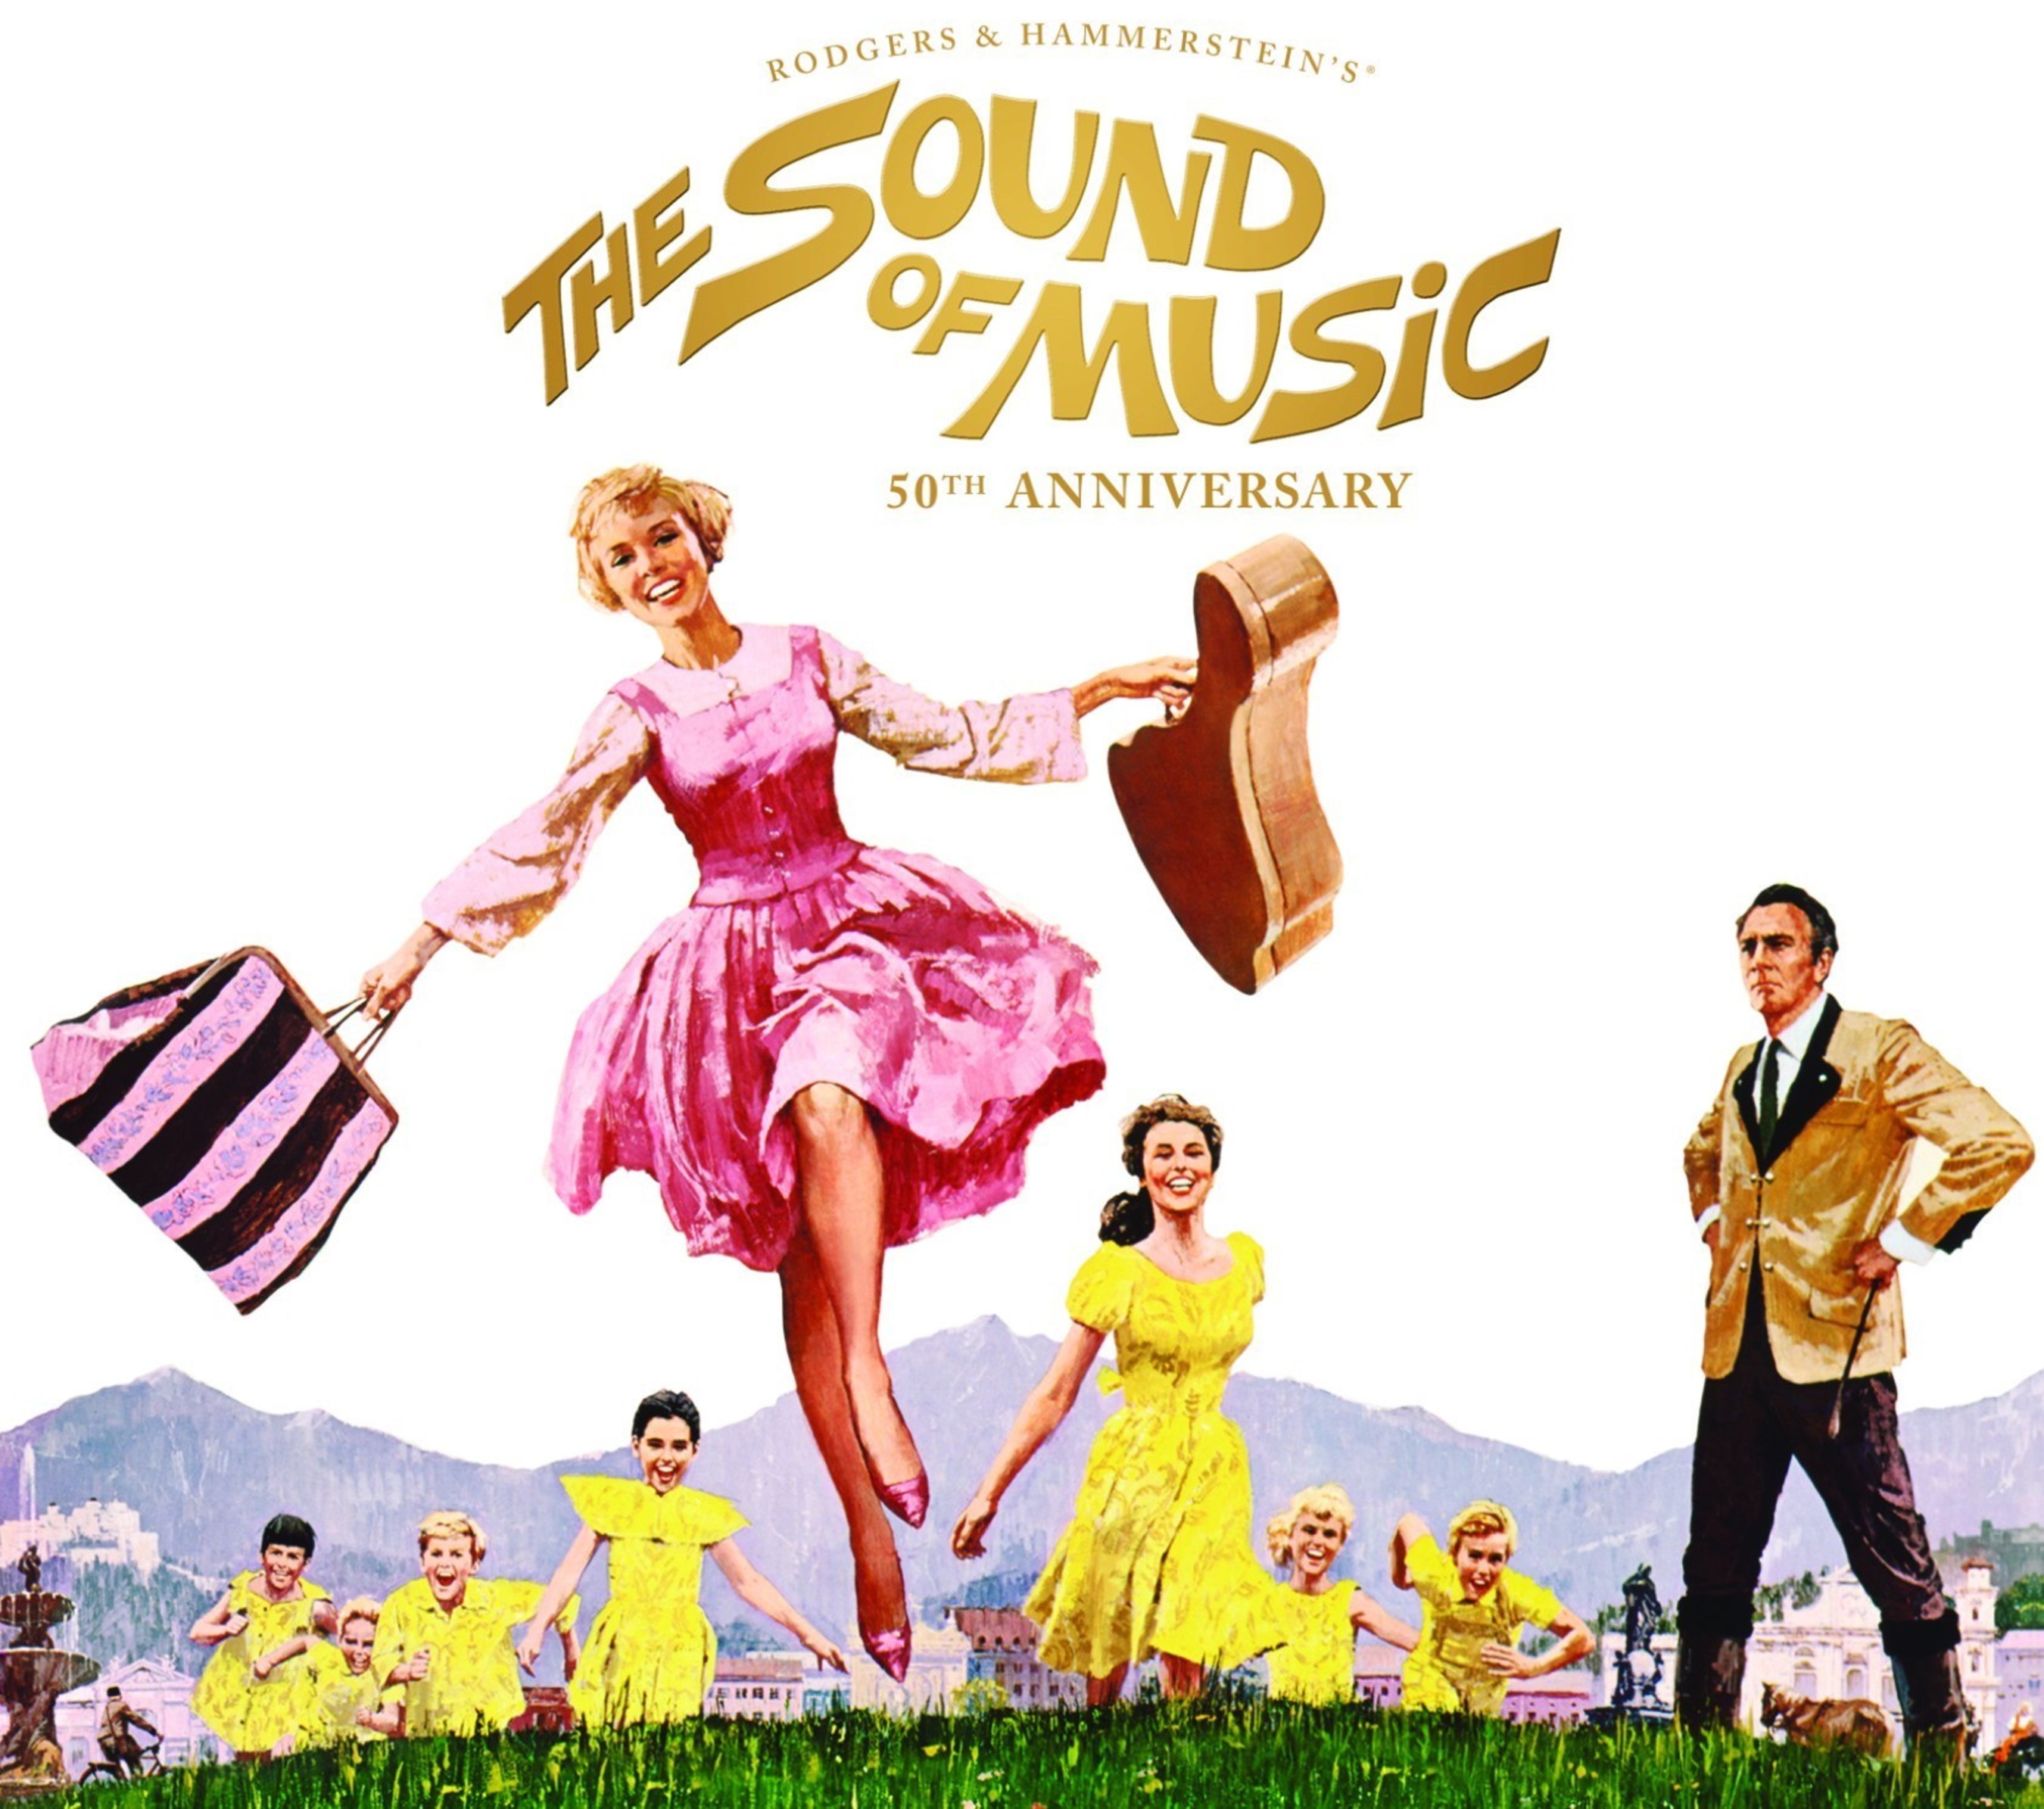 THE SOUND OF MUSIC - 50th ANNIVERSARY EDITION, a multi-format soundtrack release celebrating Rodgers & Hammerstein's 5-time Academy Award-winning movie musical in a newly remastered and expanded version, will be available everywhere on March 10th